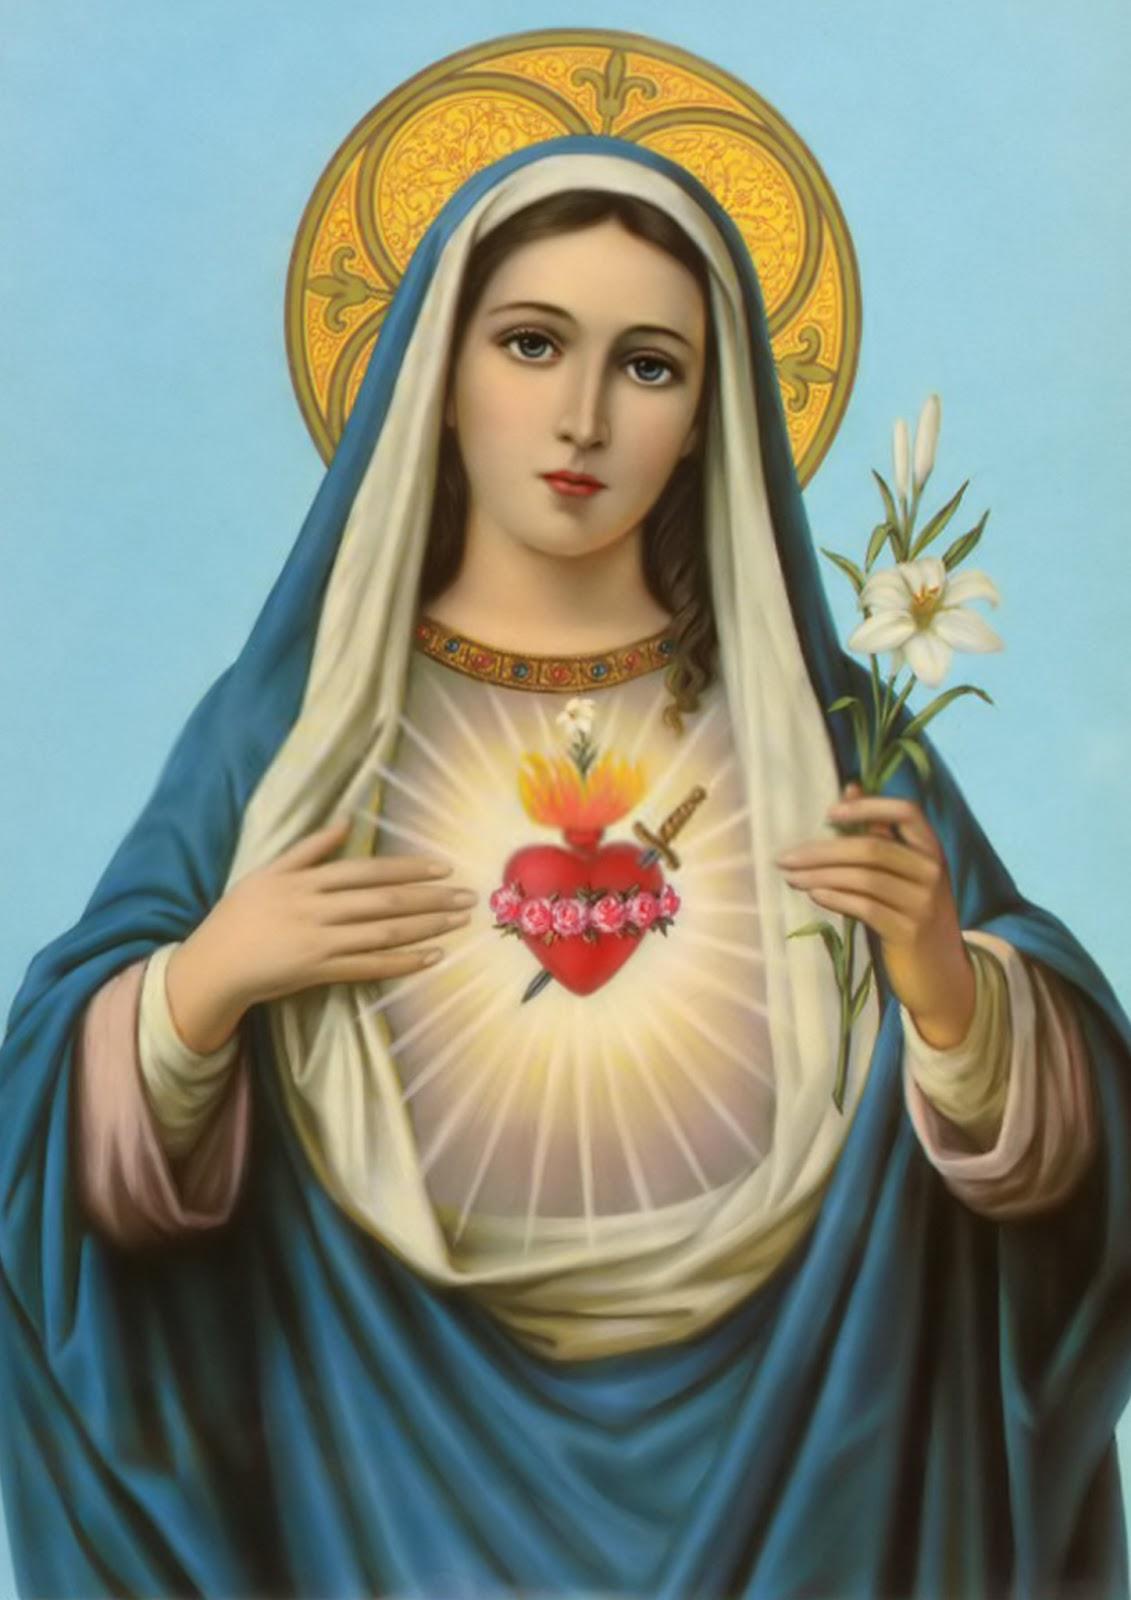 Mary wallpaper, Religious, HQ Mary pictureK Wallpaper 2019